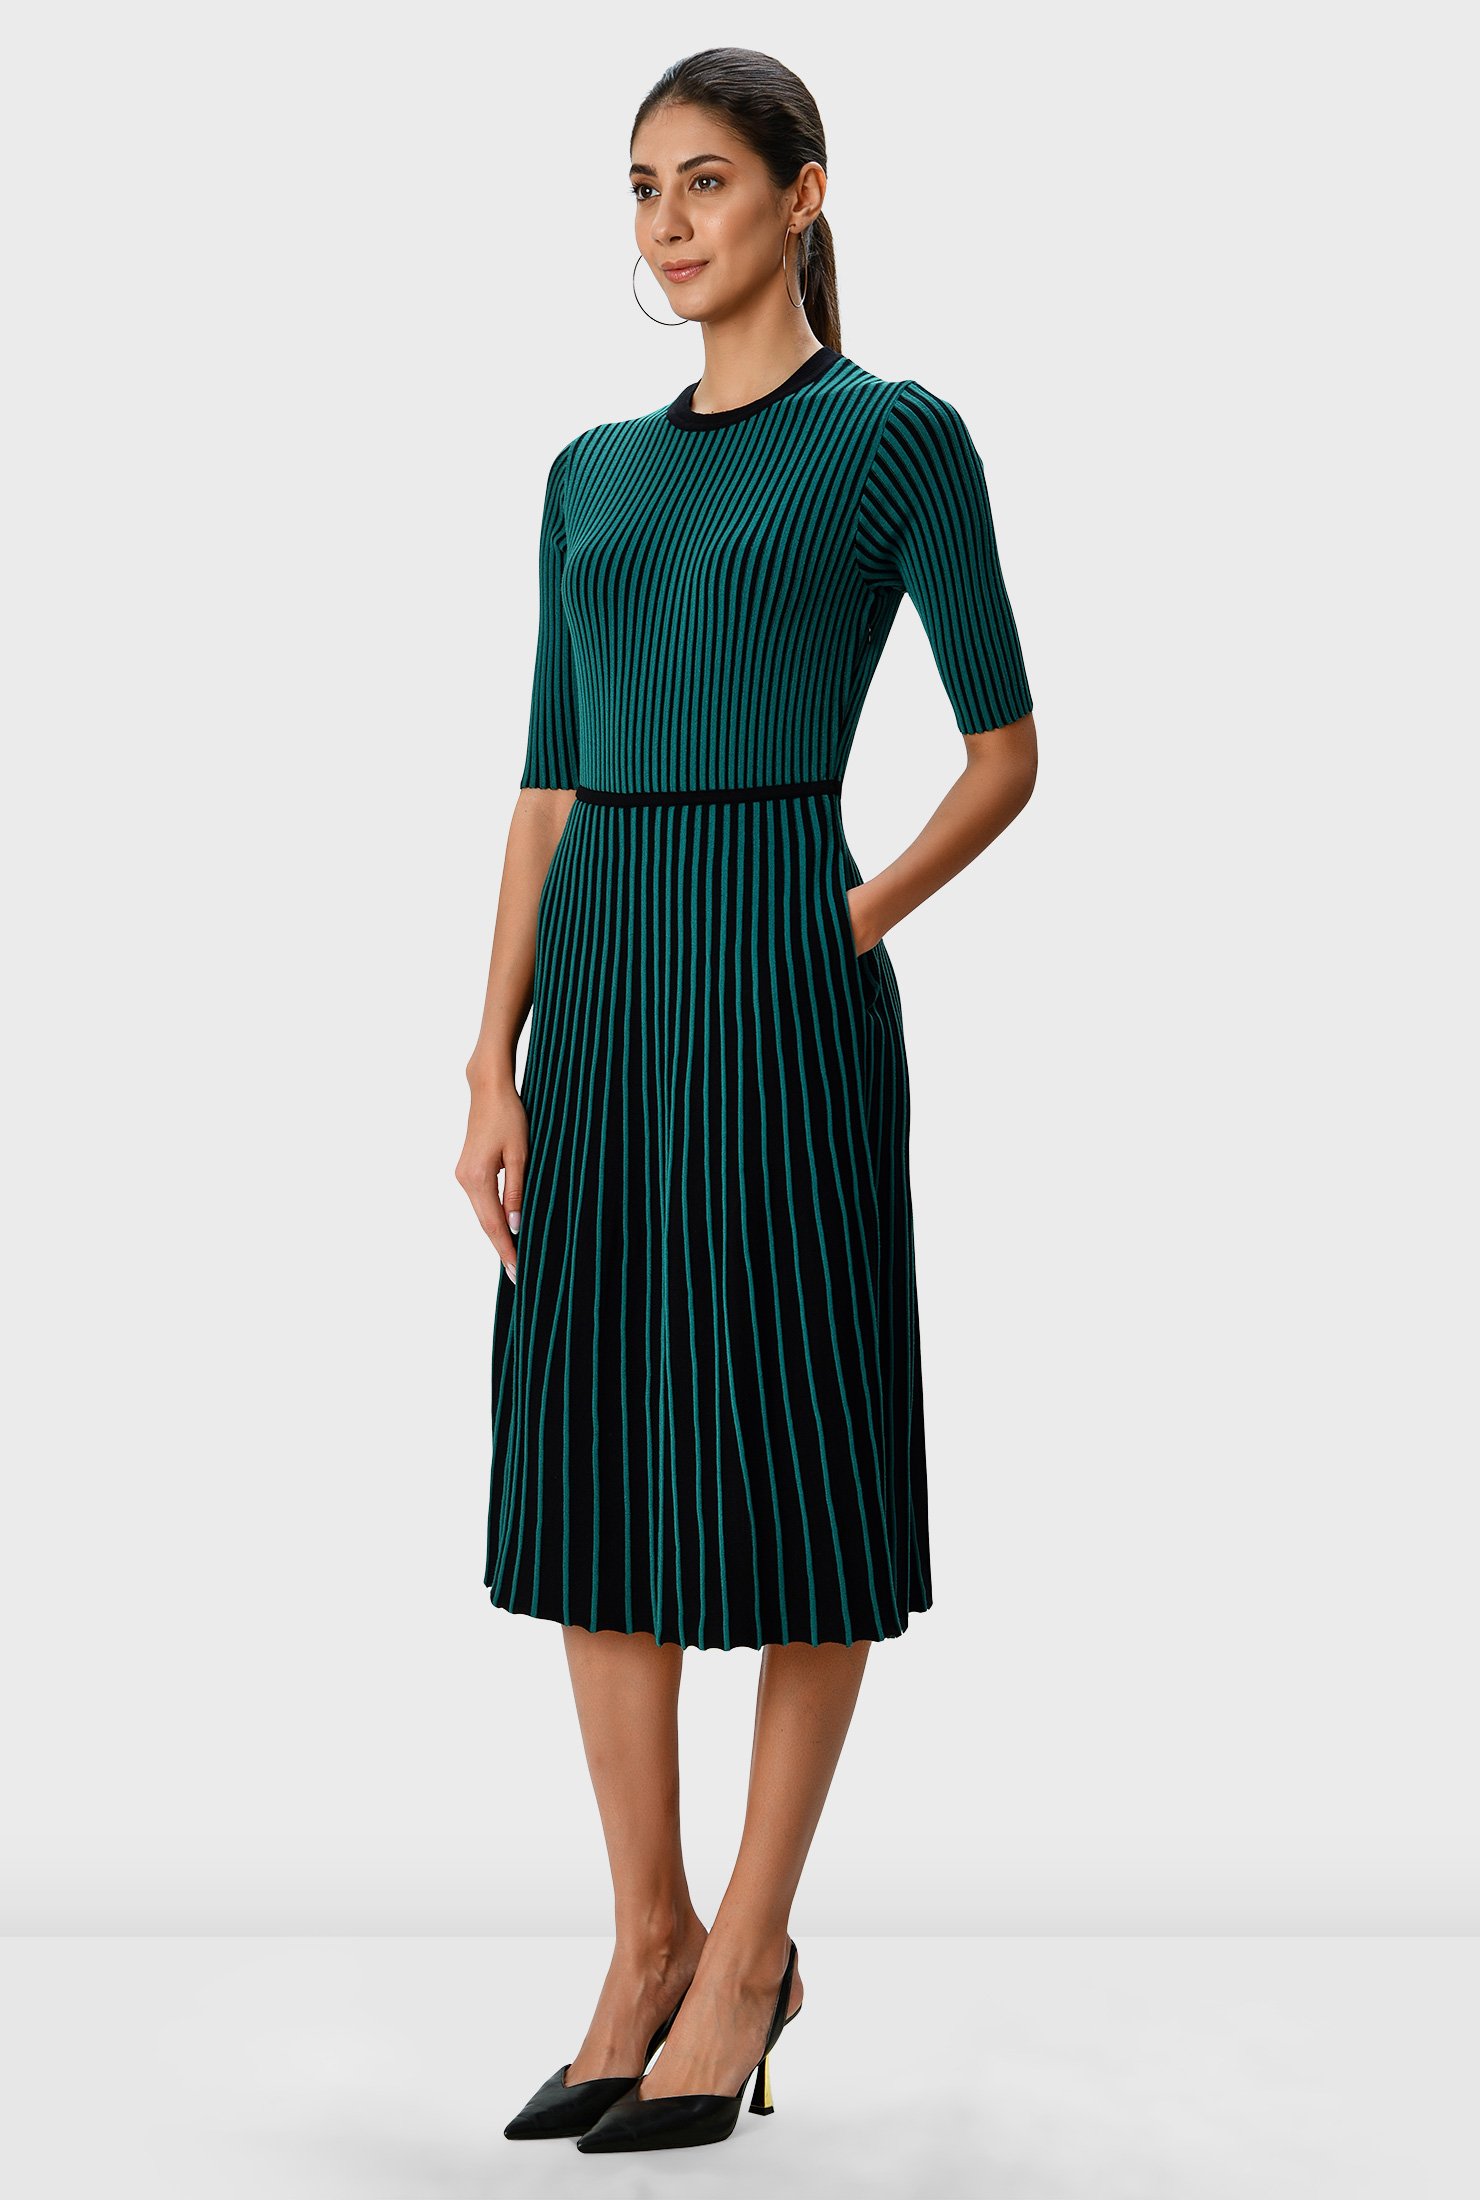 herlipto Trimmed Cable Knit Two-Piece